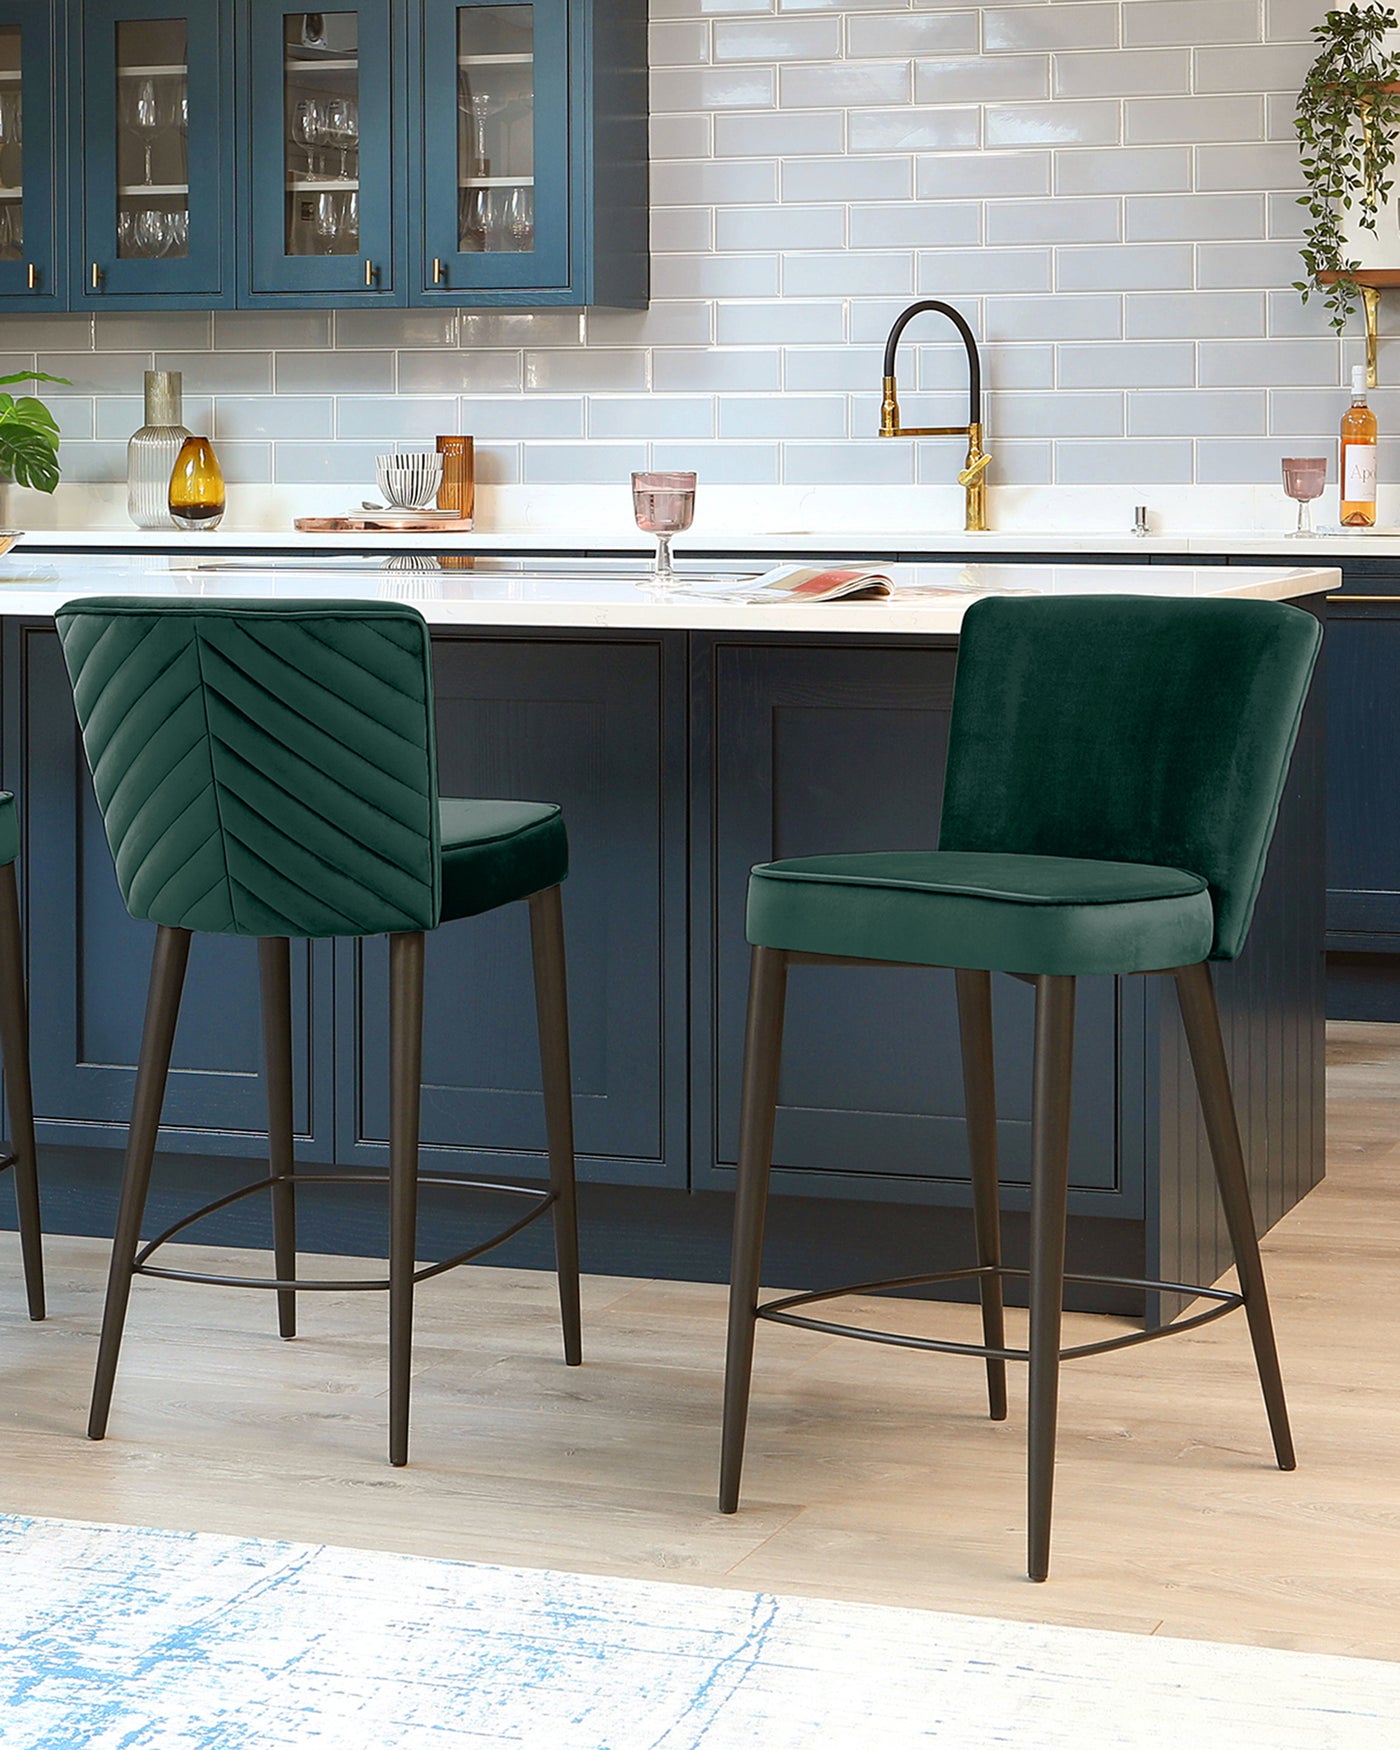 Two elegant green velvet bar stools with diamond tufting and sleek black metal legs, positioned at a kitchen island.